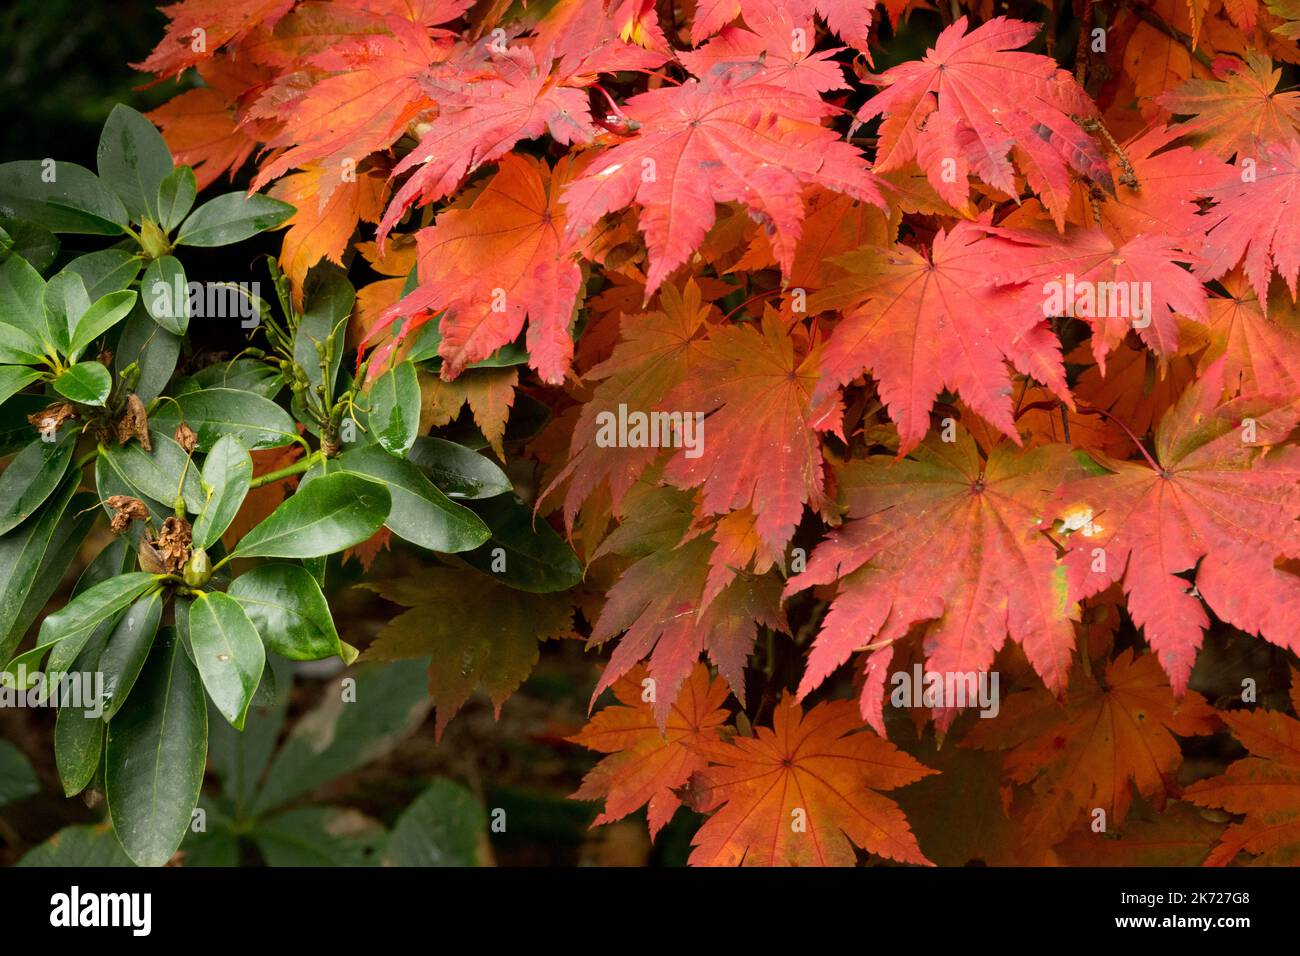 Autumn, Red, Maple, Leaves, Rhododendron, Acer palmatum, Japanese Maple foliage Stock Photo